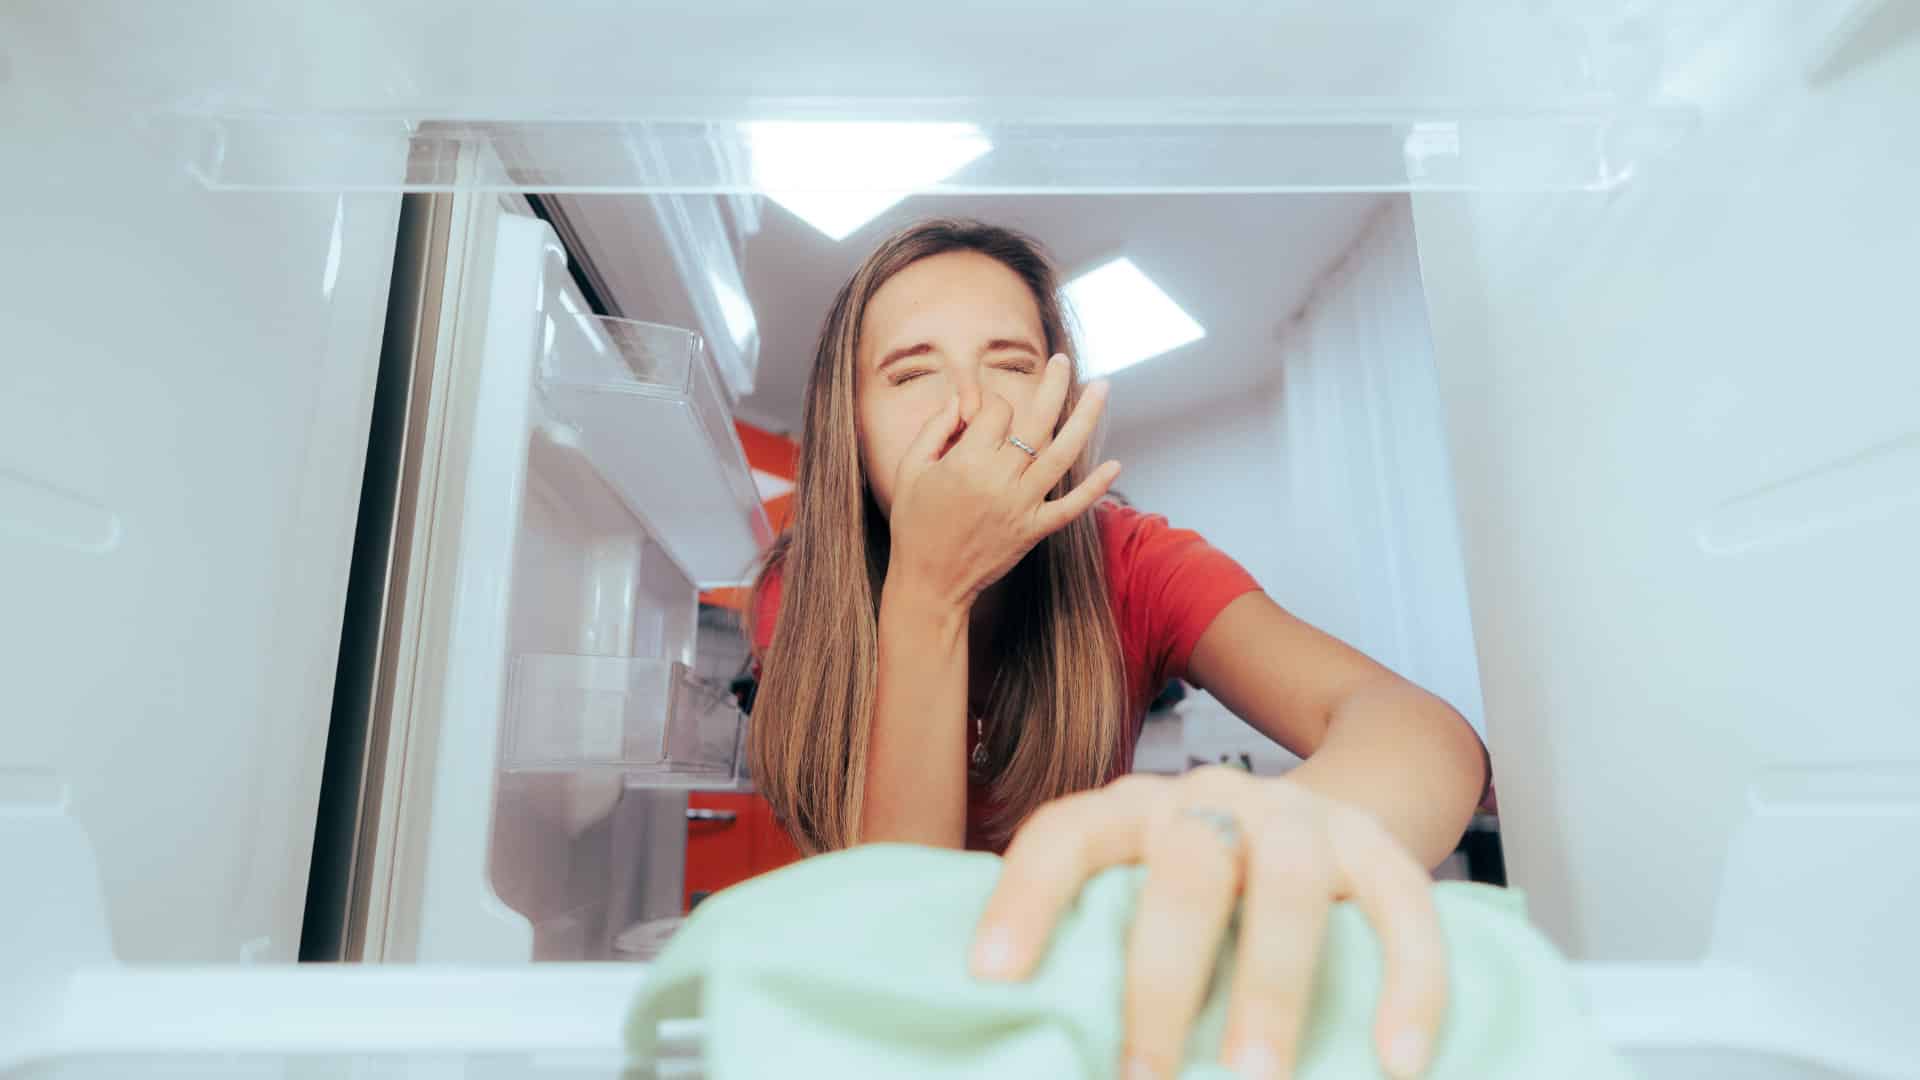 Featured image for “How to Clean a Smelly Refrigerator Quickly”